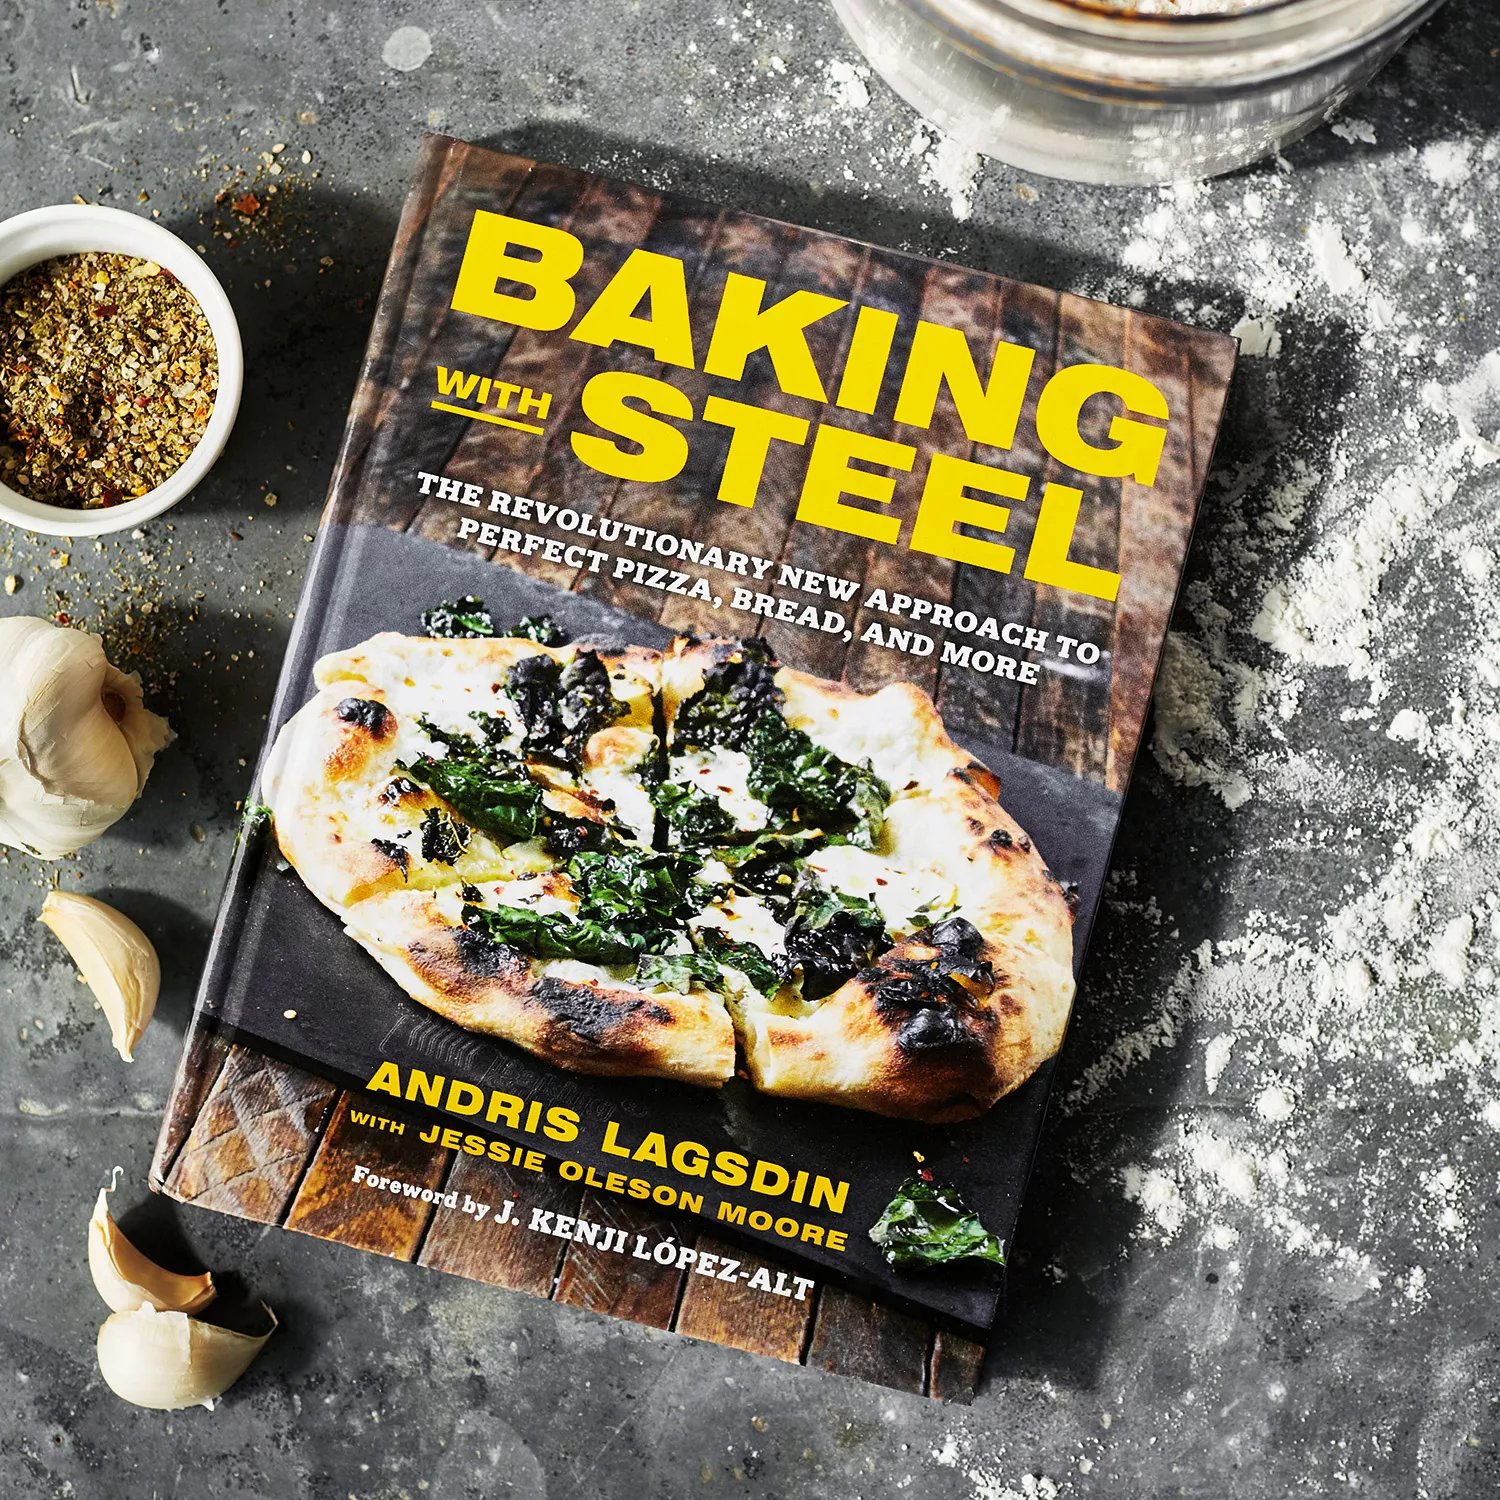 Hachette Book Group Baking with Steel: The Revolutionary New Approach to Perfect Pizza, Bread, and More